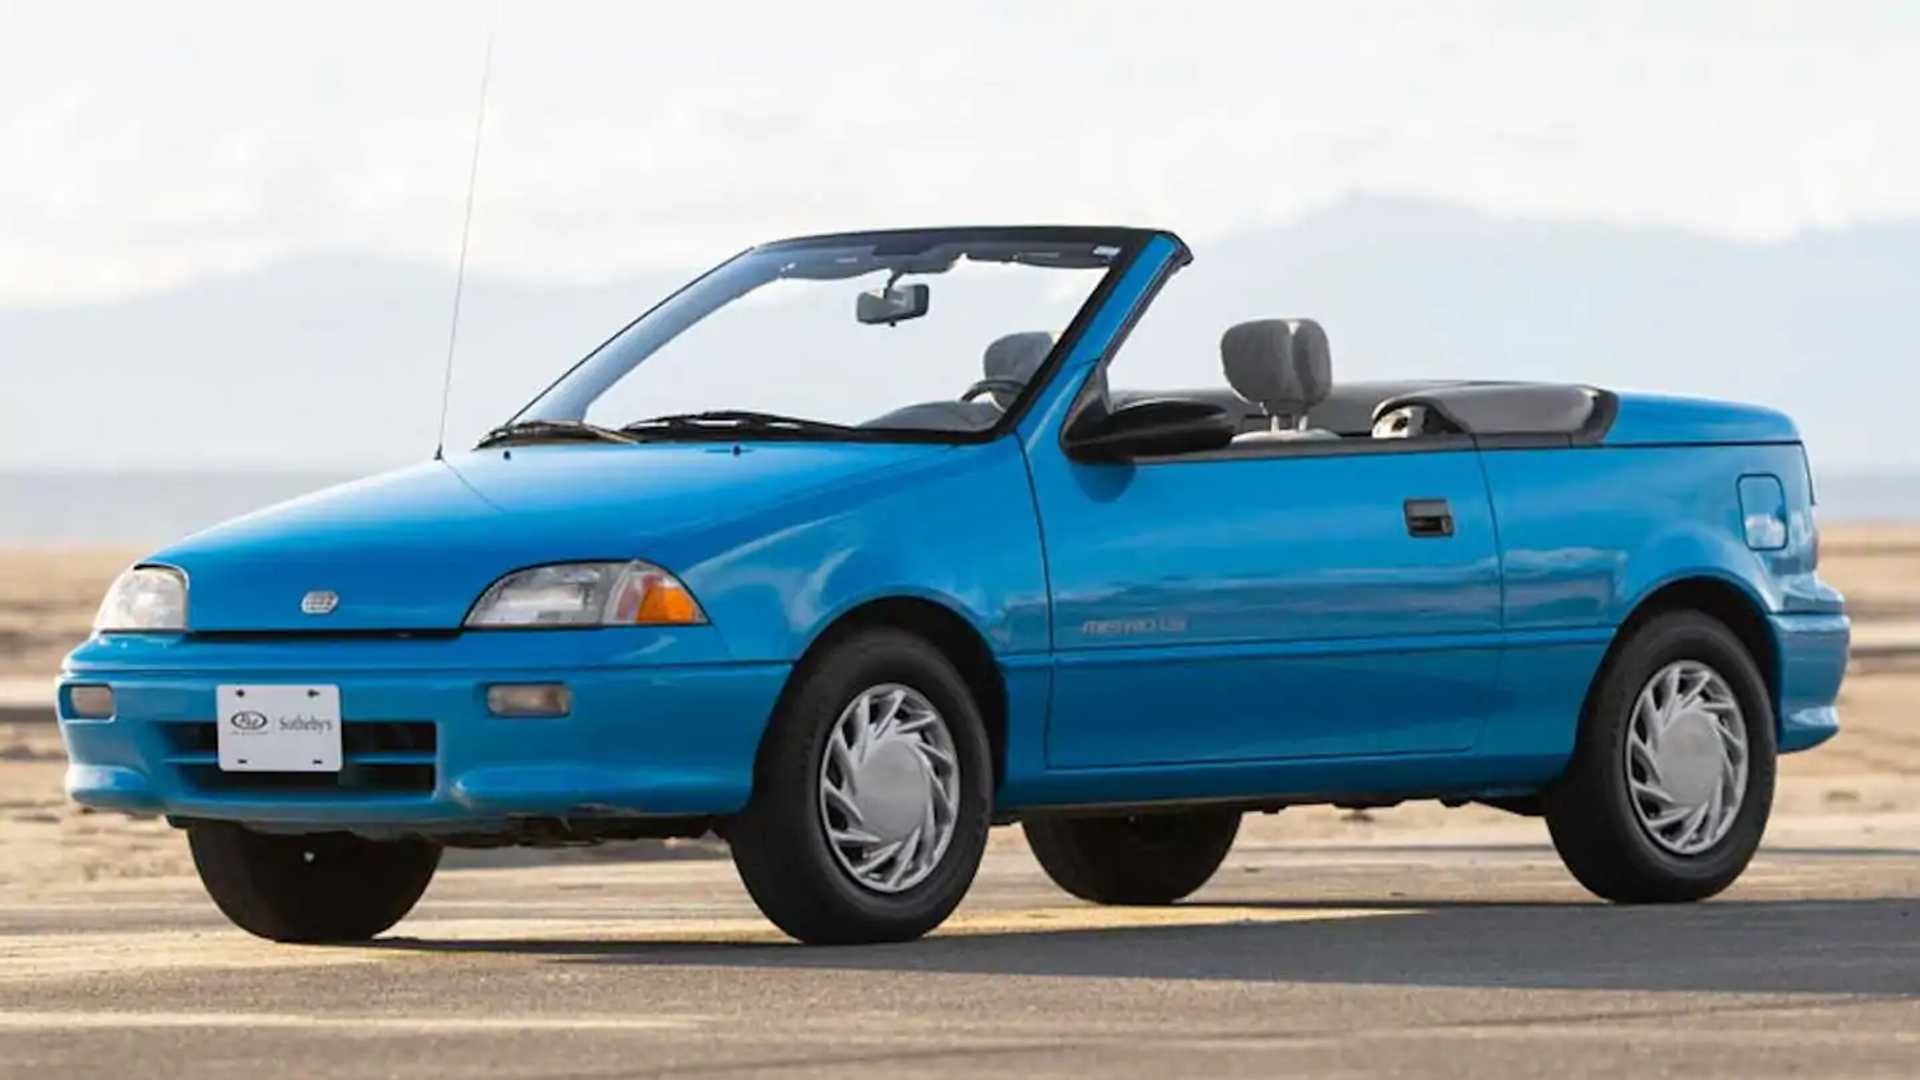 This Geo Metro Convertible Is The Headliner At An RM Sotheby's Auction